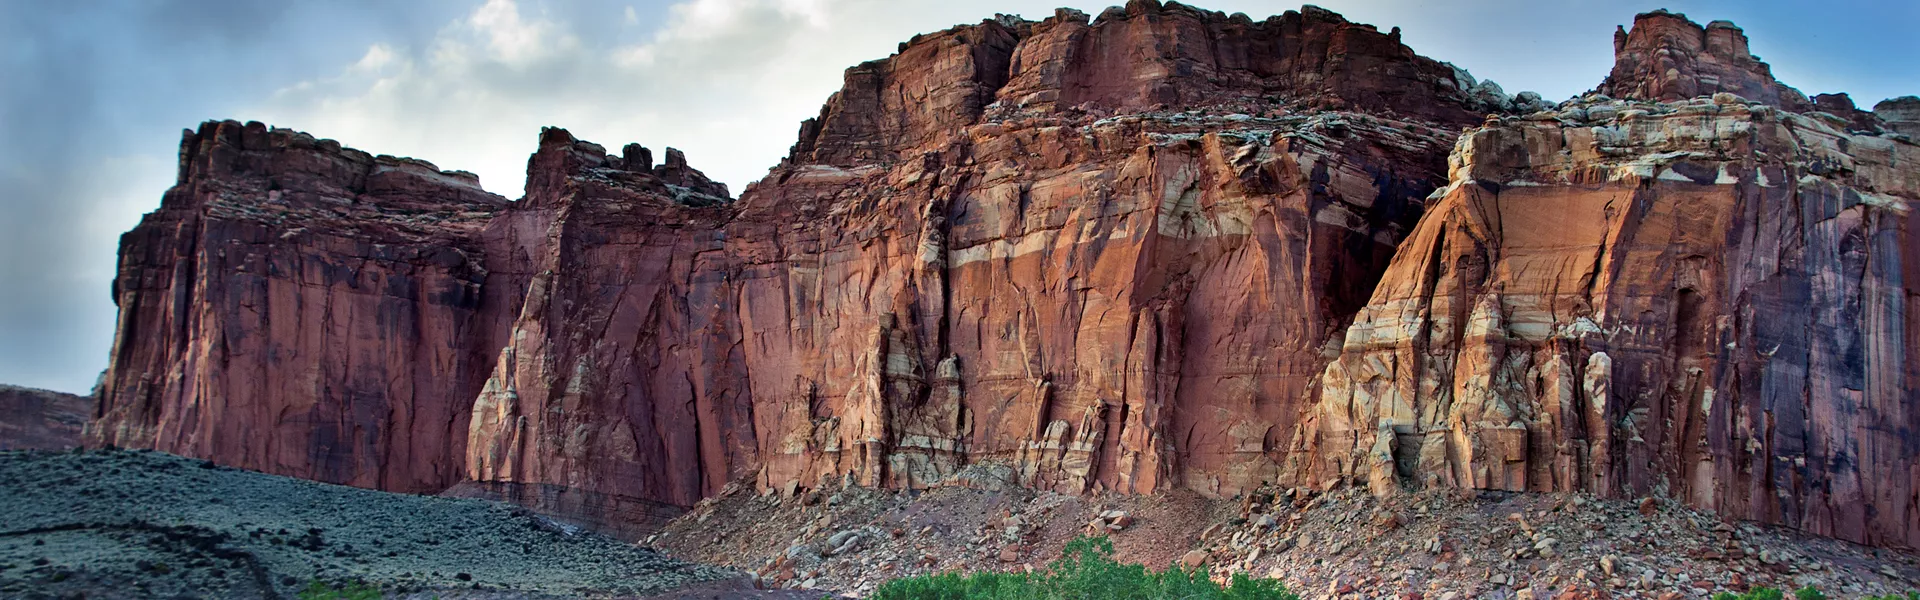 Capitol Reef National Park - 1003673538